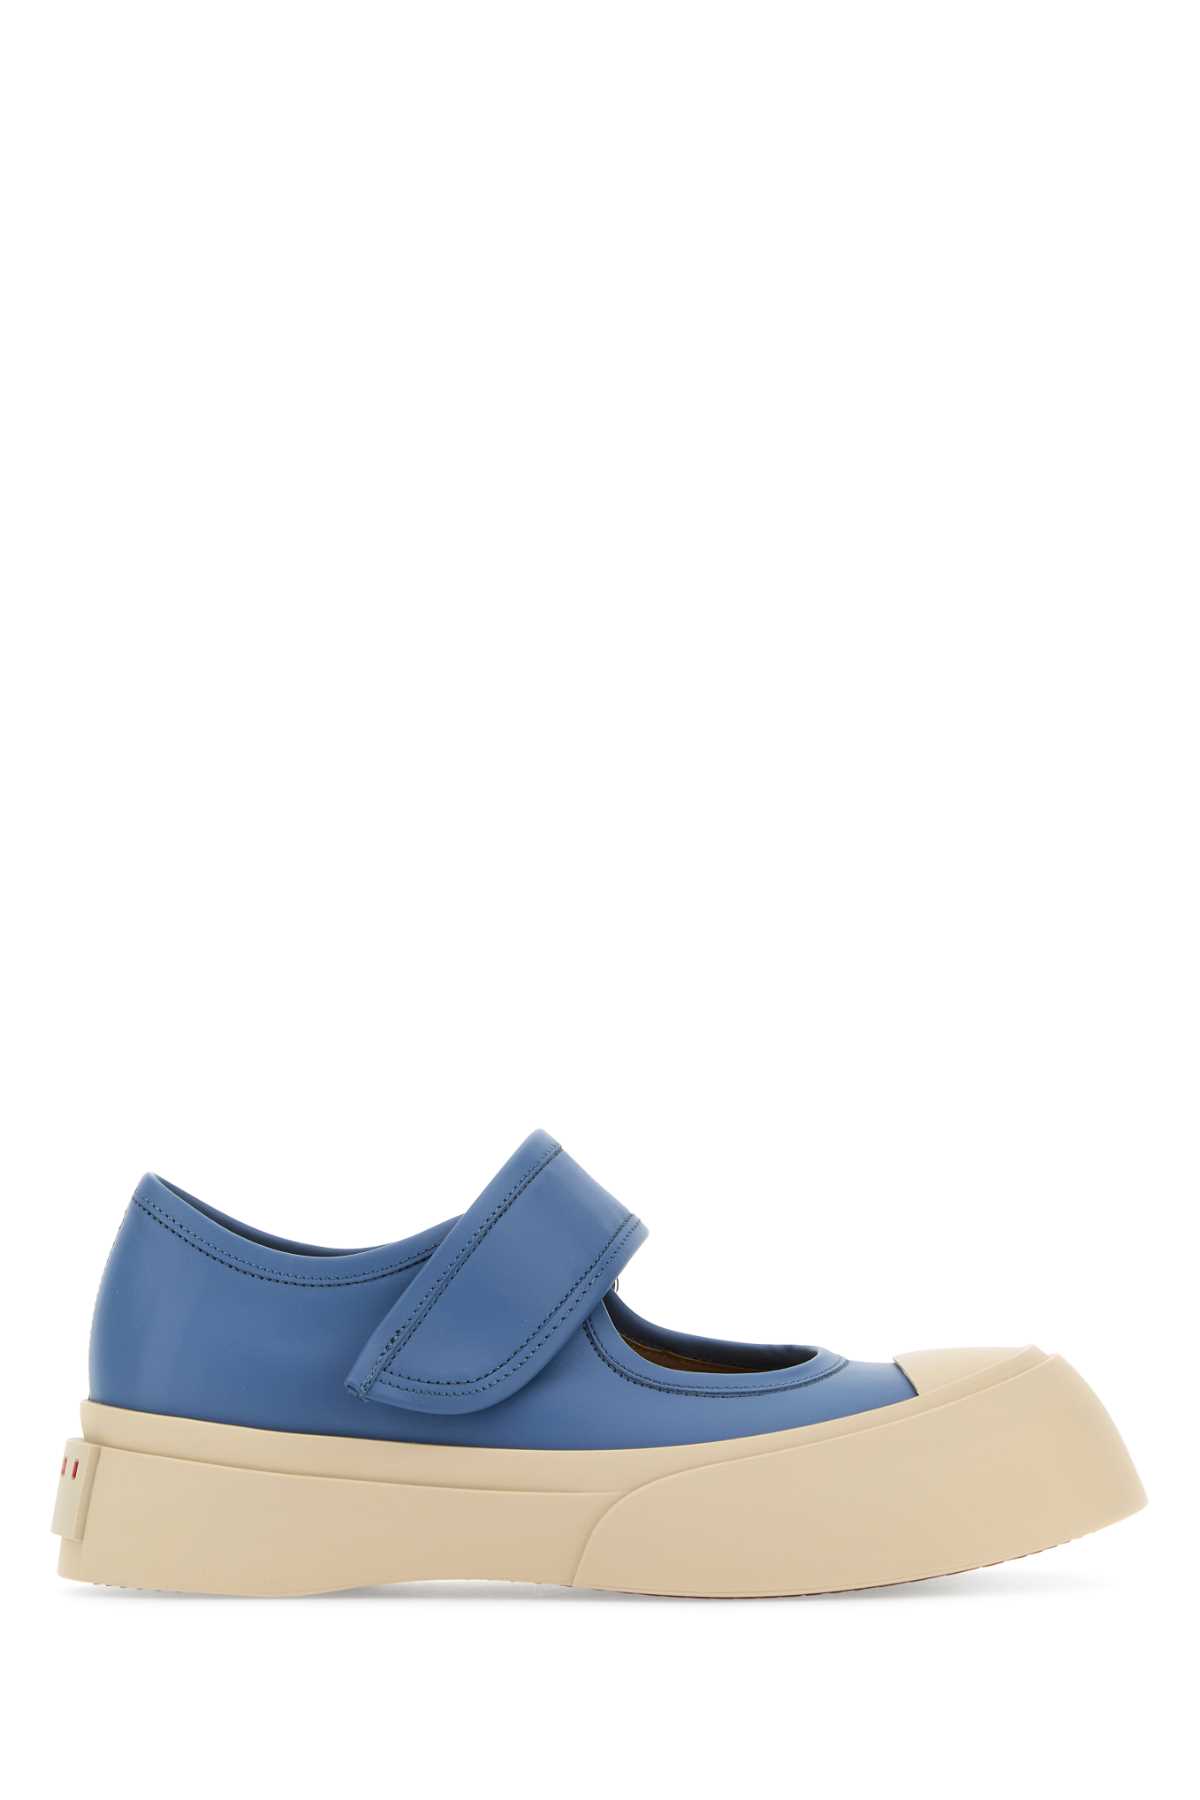 Marni Air Force Blue Leather Mary Jane Sneakers In 00b37